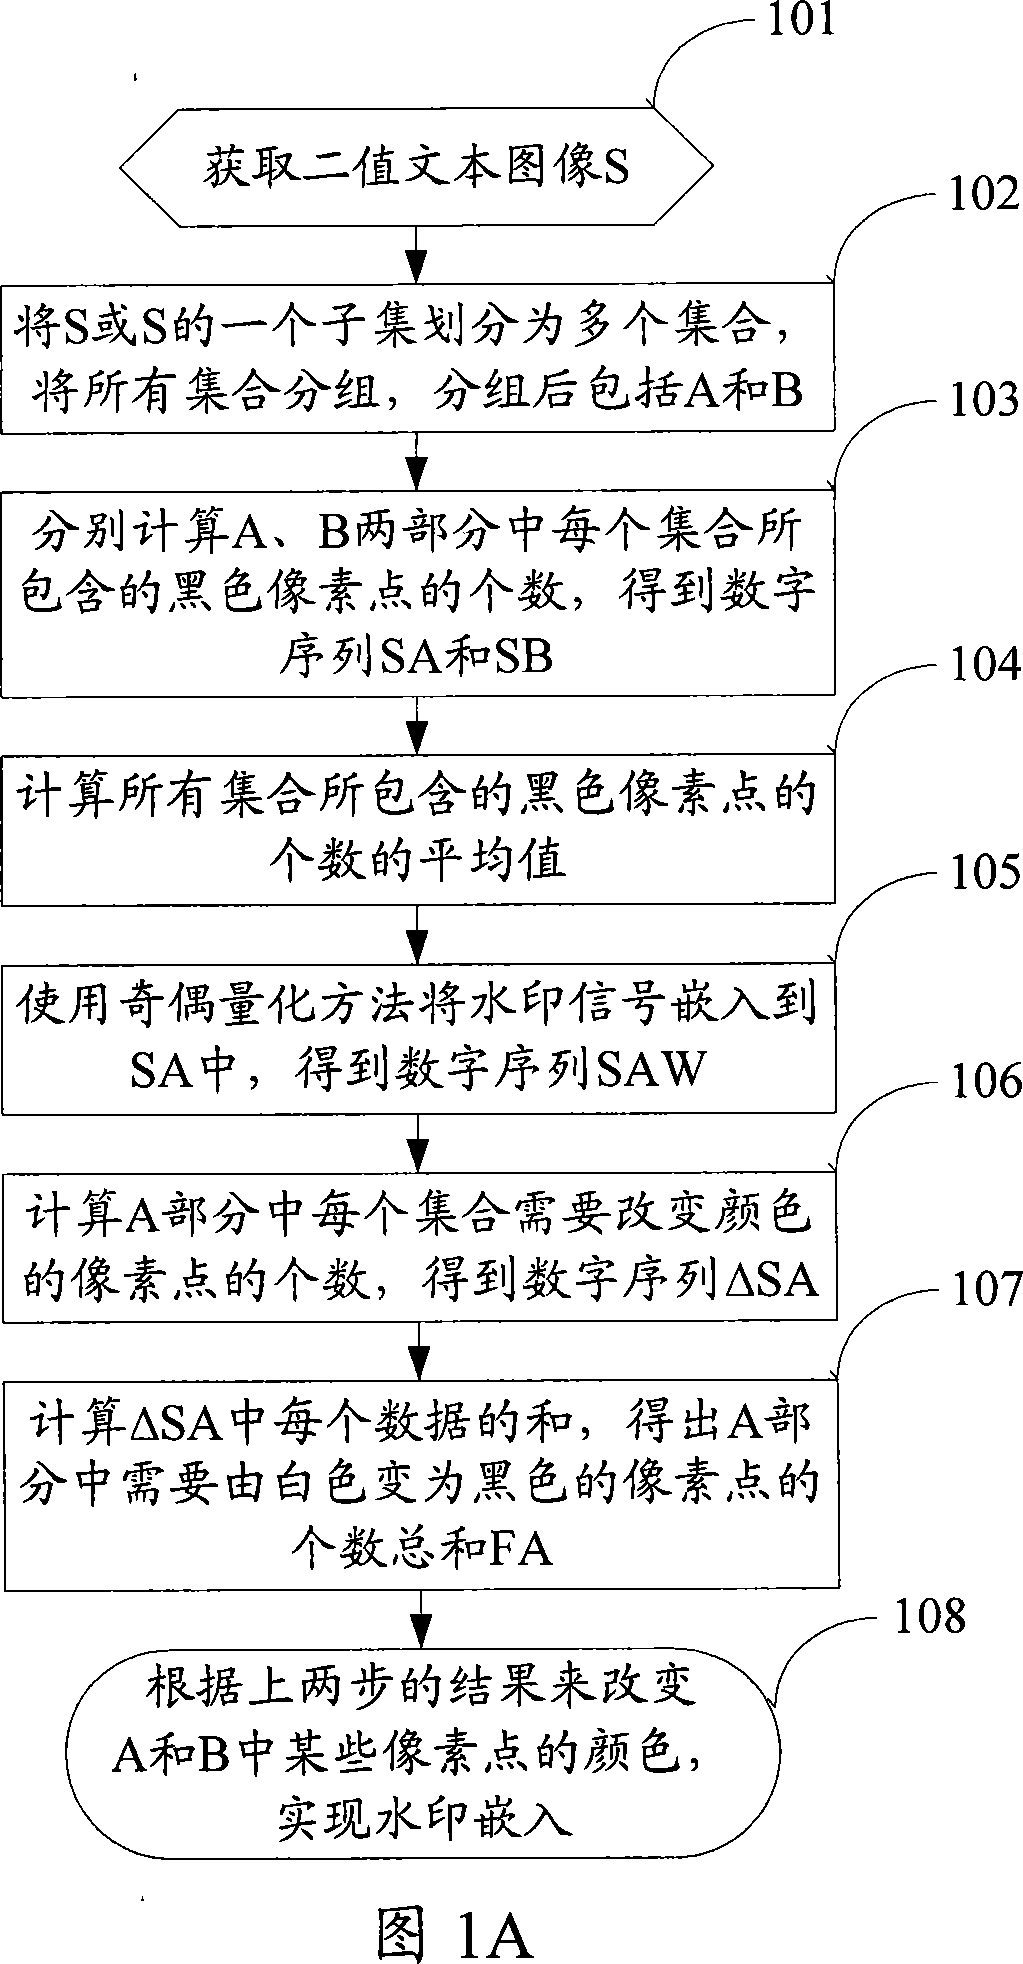 Apparatus and method for abstracting and imbedding digital watermarking in two value text image